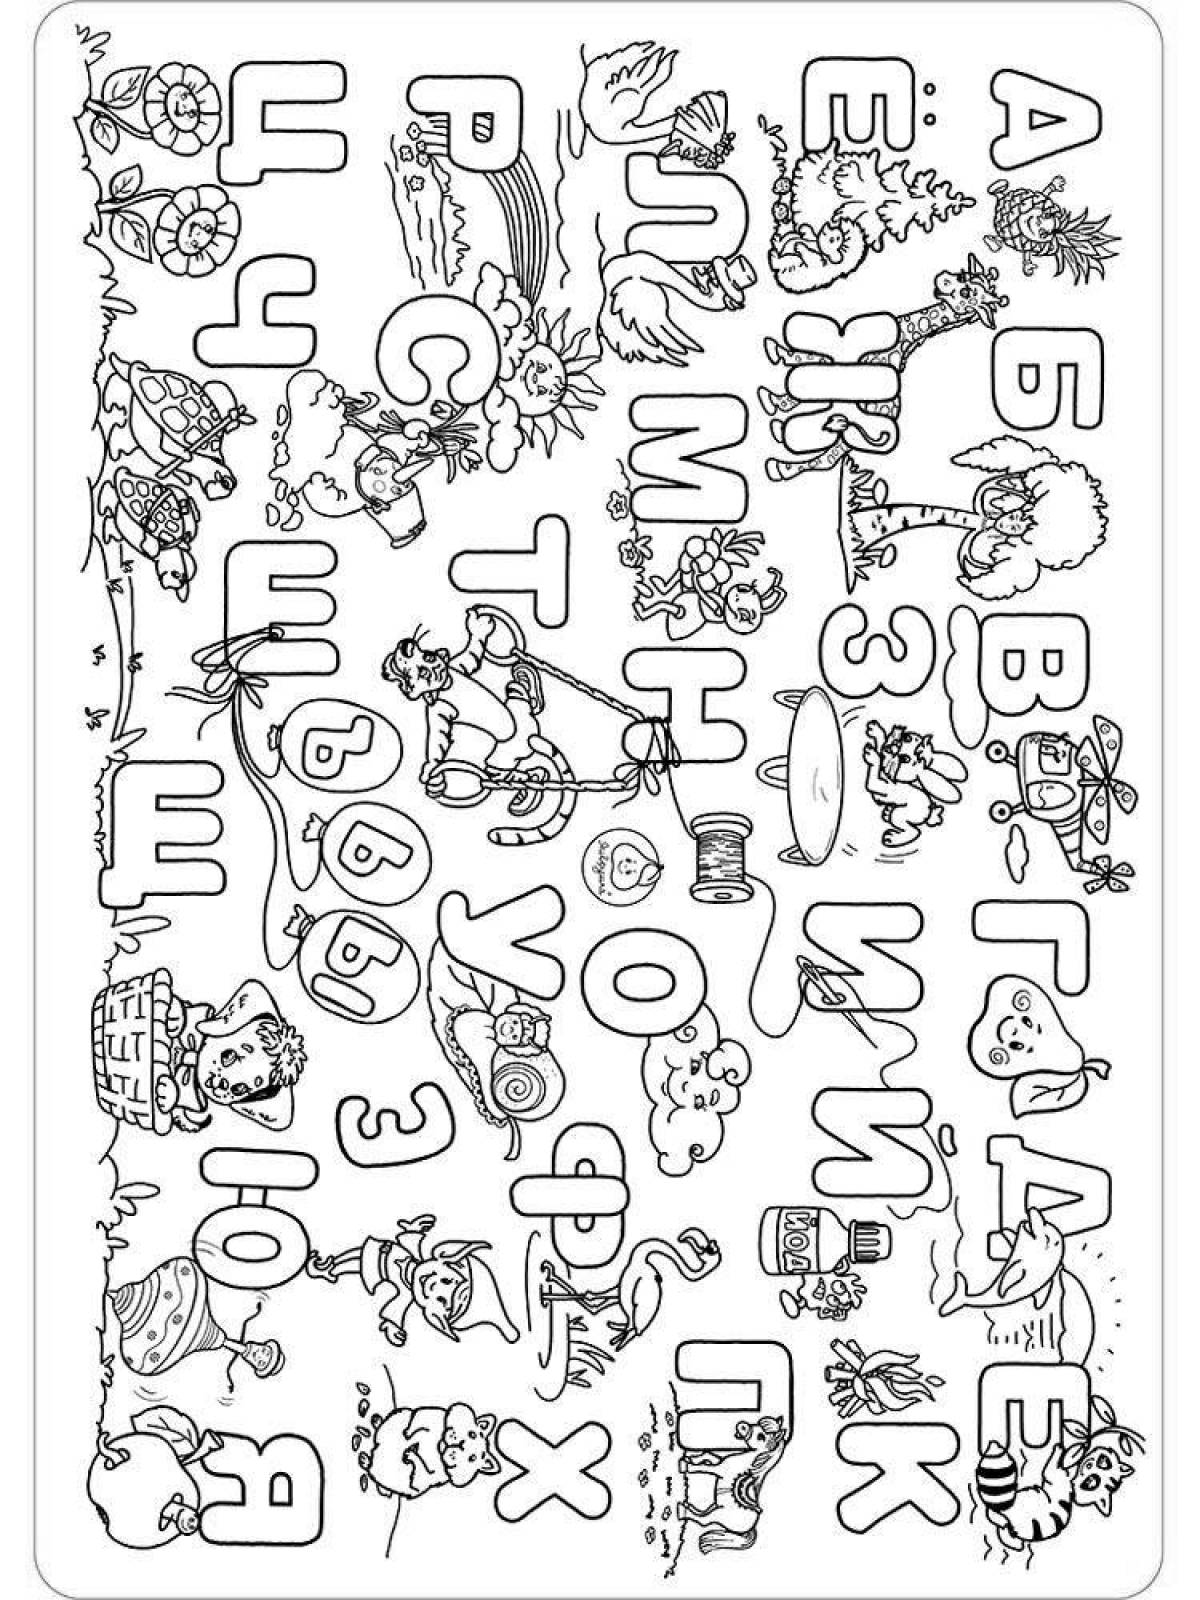 Color-frenzy lori alphabet coloring page